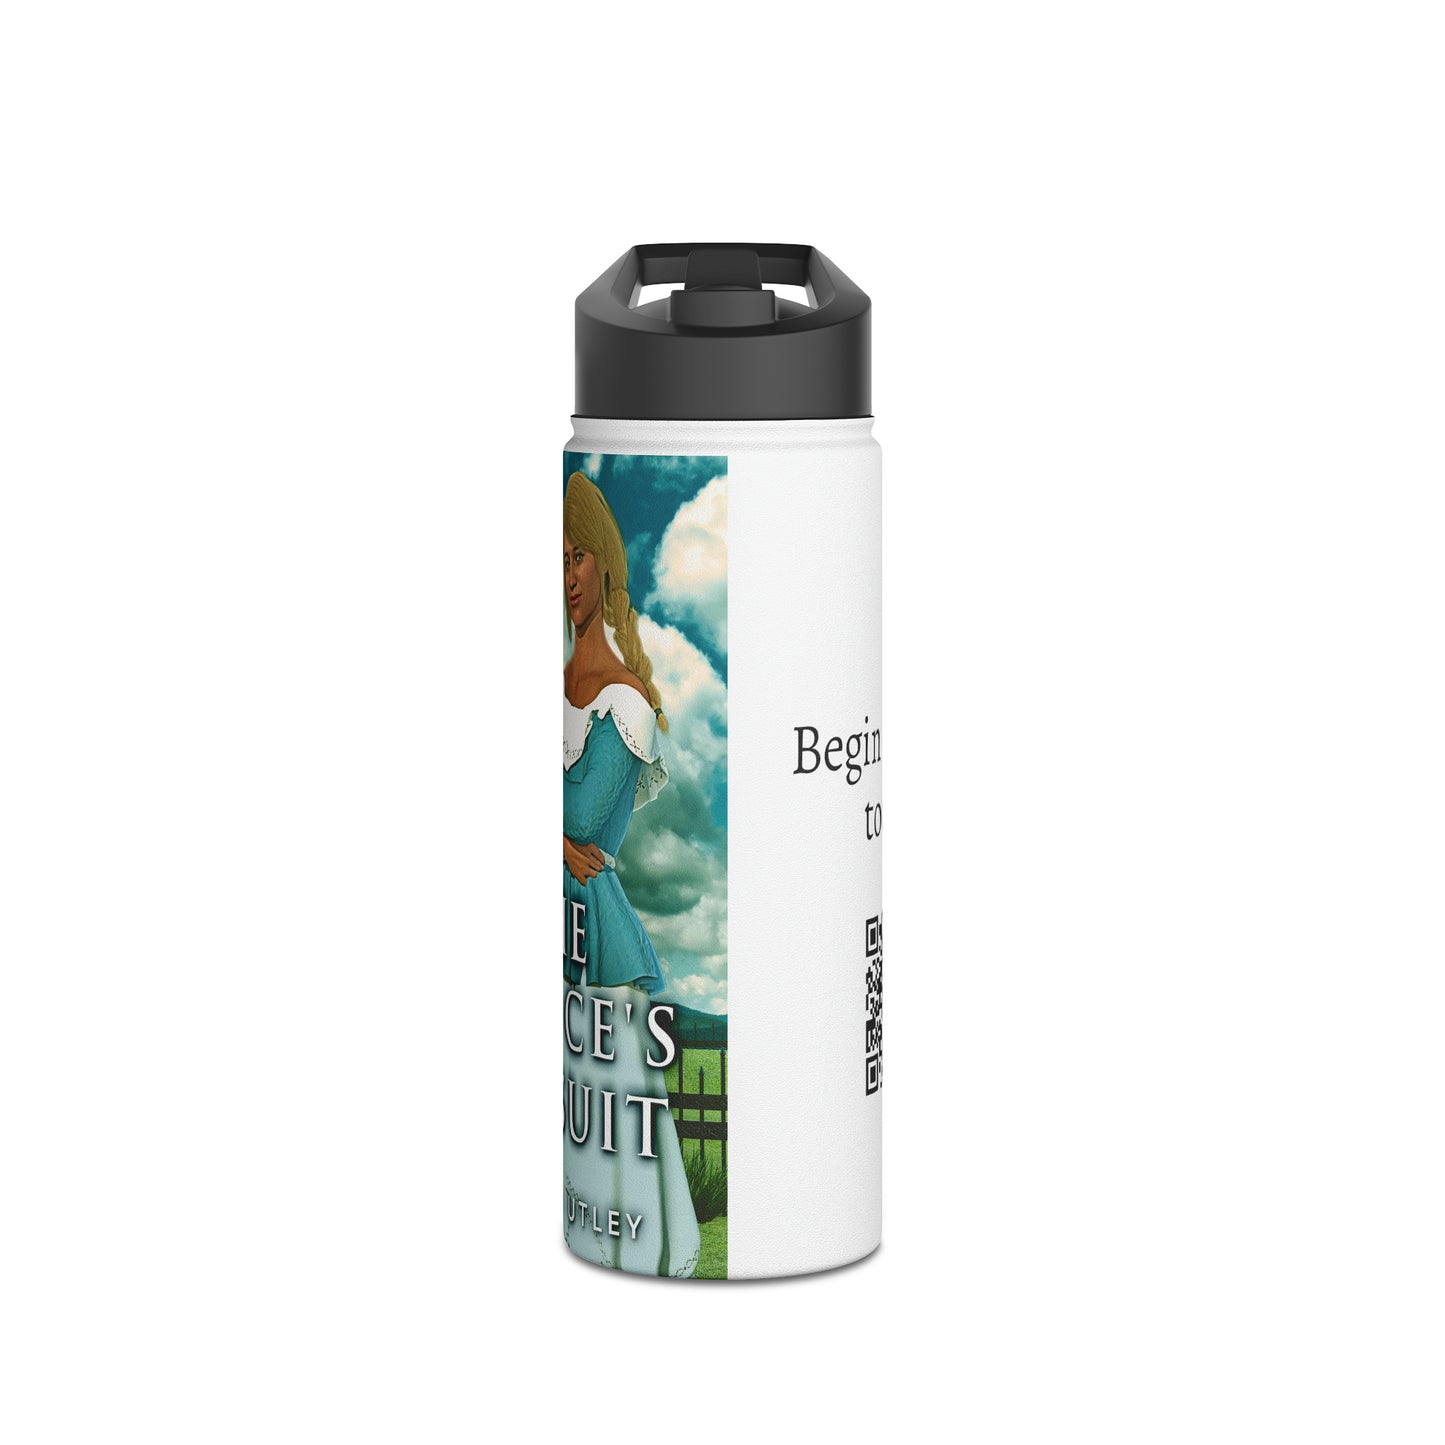 The Prince's Pursuit - Stainless Steel Water Bottle